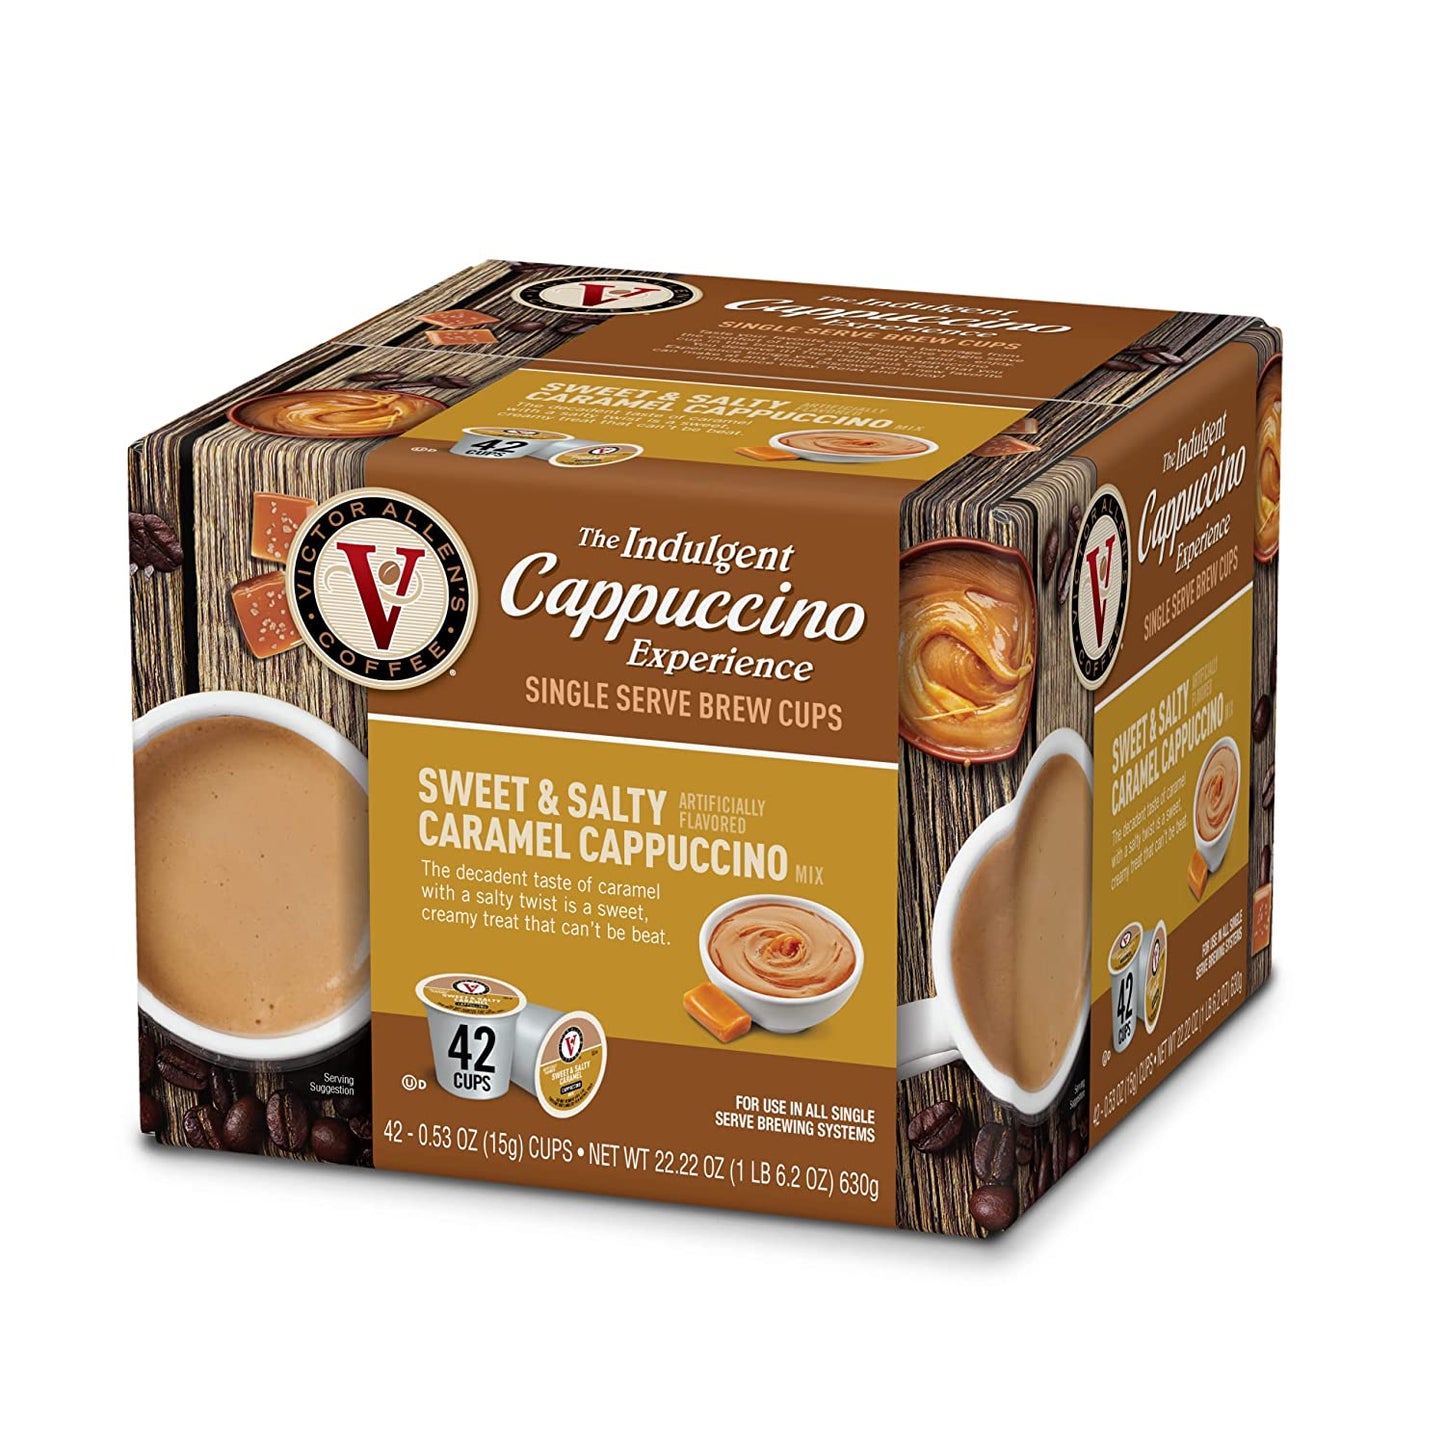 Victor Allen's Coffee Caramel Macchiato Flavored, Medium Roast, 42 Count,  Single Serve Coffee Pods for Keurig K-Cup Brewers